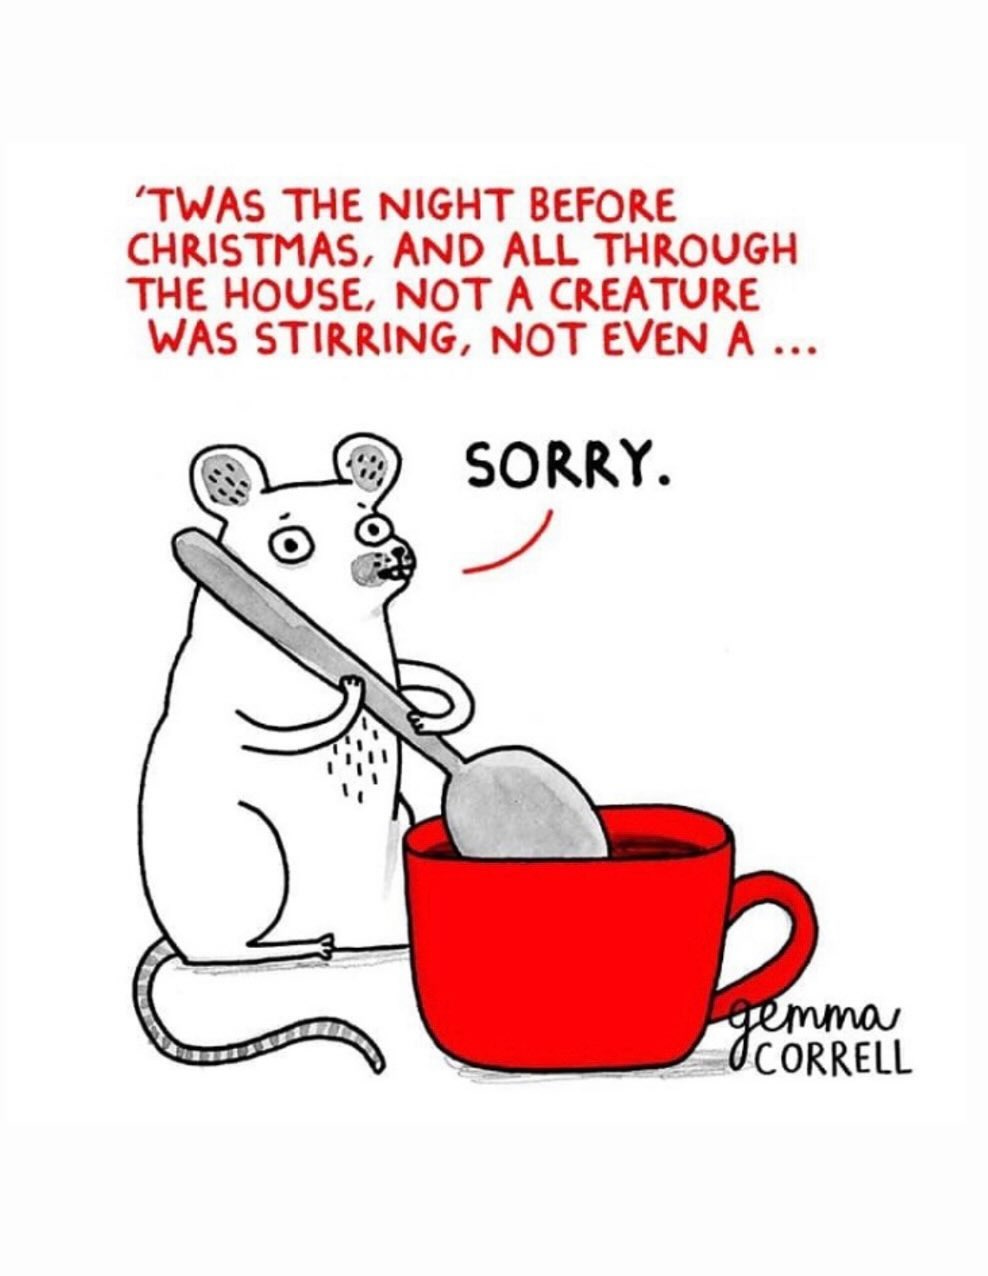 Photo by Gemma Correll on December 08, 2023. May be a cartoon of rat, rodent and text that says ''TWAS THE NIGHT BEFORE CHRISTMAS, AND ALL THROUGH THE HOUSE, NOT A CREATURE WAS STIRRING, NOT EVEN SORRY. gemma OCORRELL'.